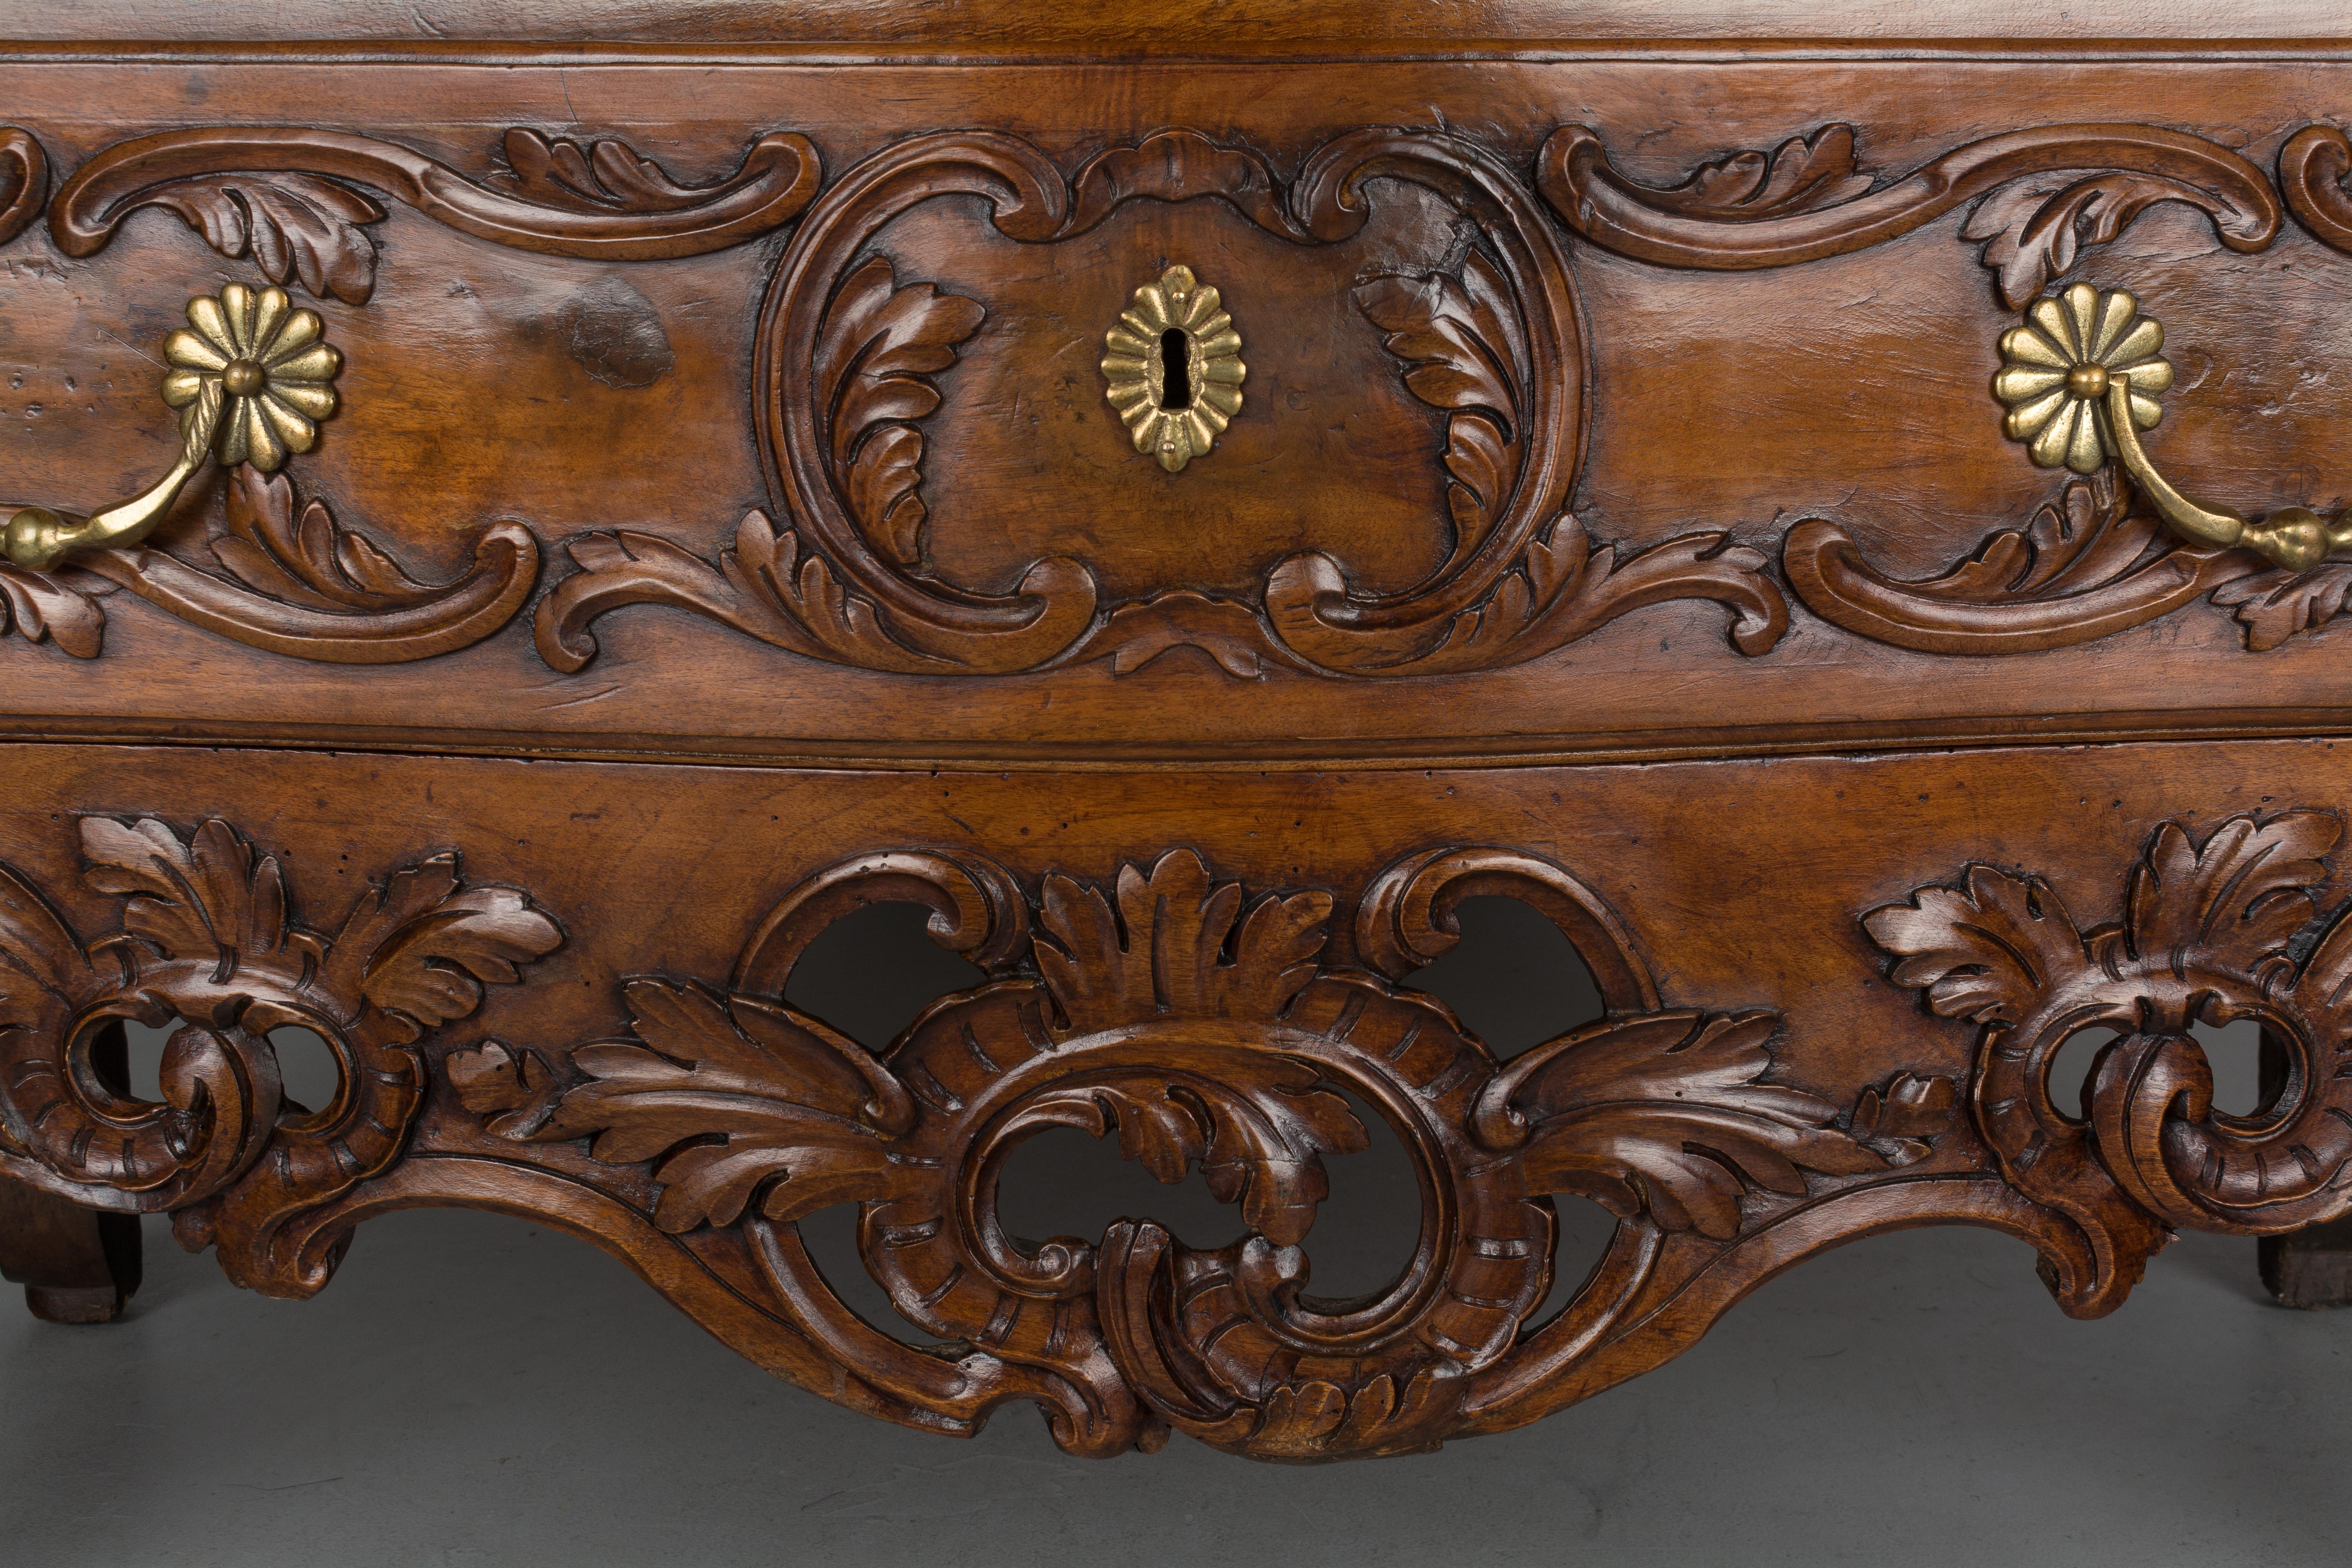 A fine 18th century Louis XV period commode from the town of Nîmes in Provence. Made of solid walnut with serpentine front and raised panels on the sides. Pegged construction with waxed finish. Beautiful hand carved foliate decoration including an